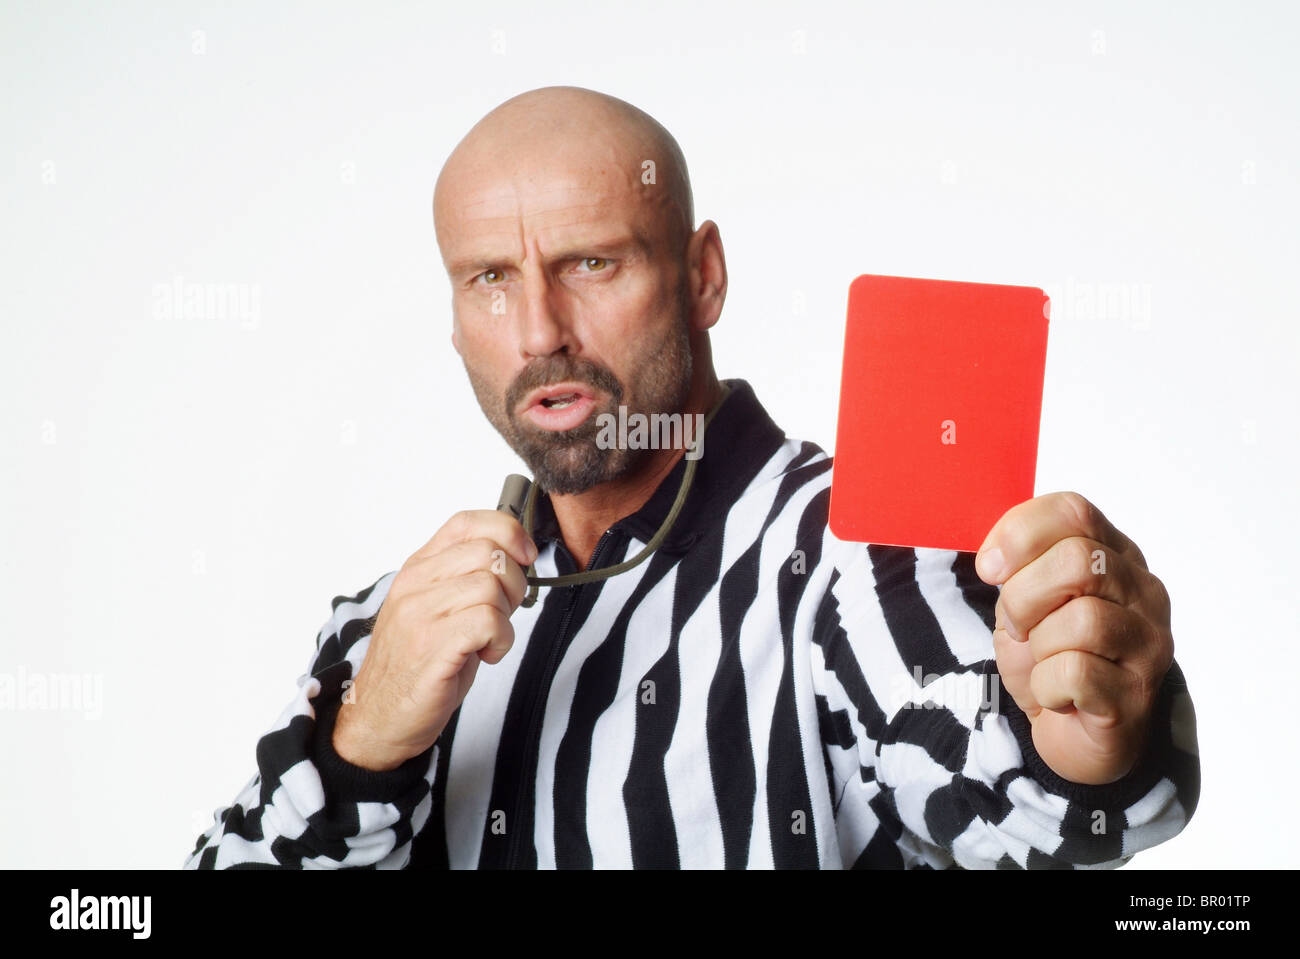 A soccer referee showing a red card Stock Photo